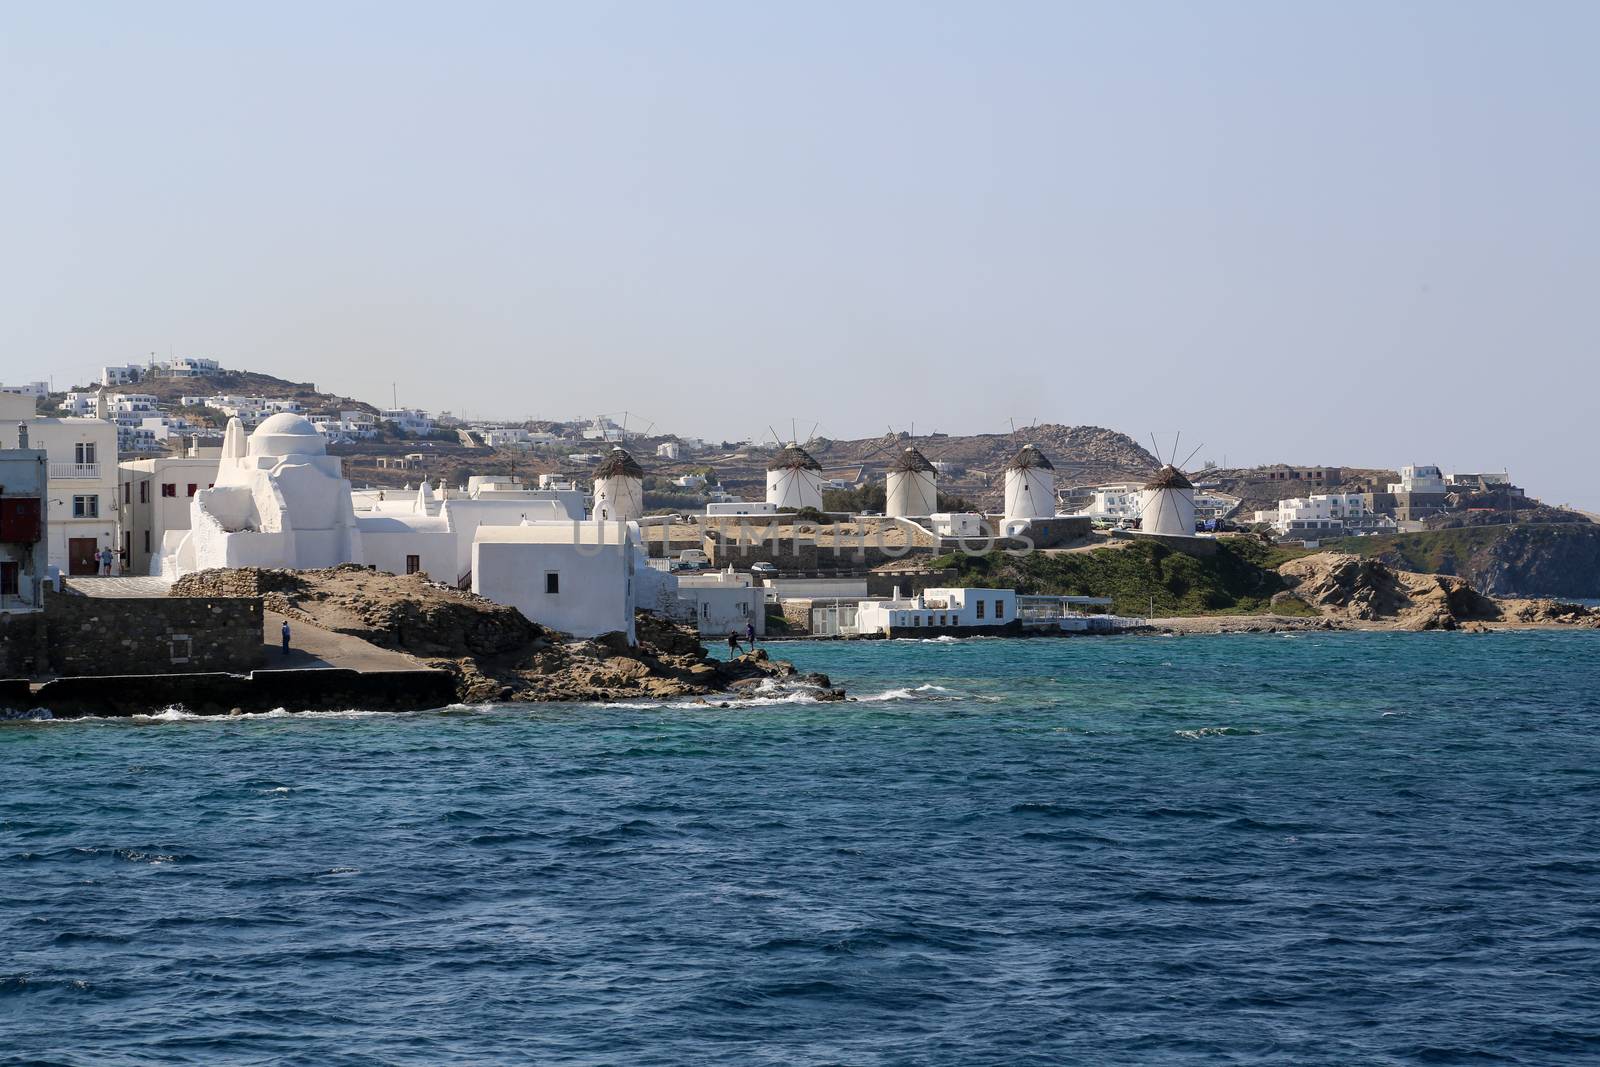 View from the sea of the famous Mykonos wind mills